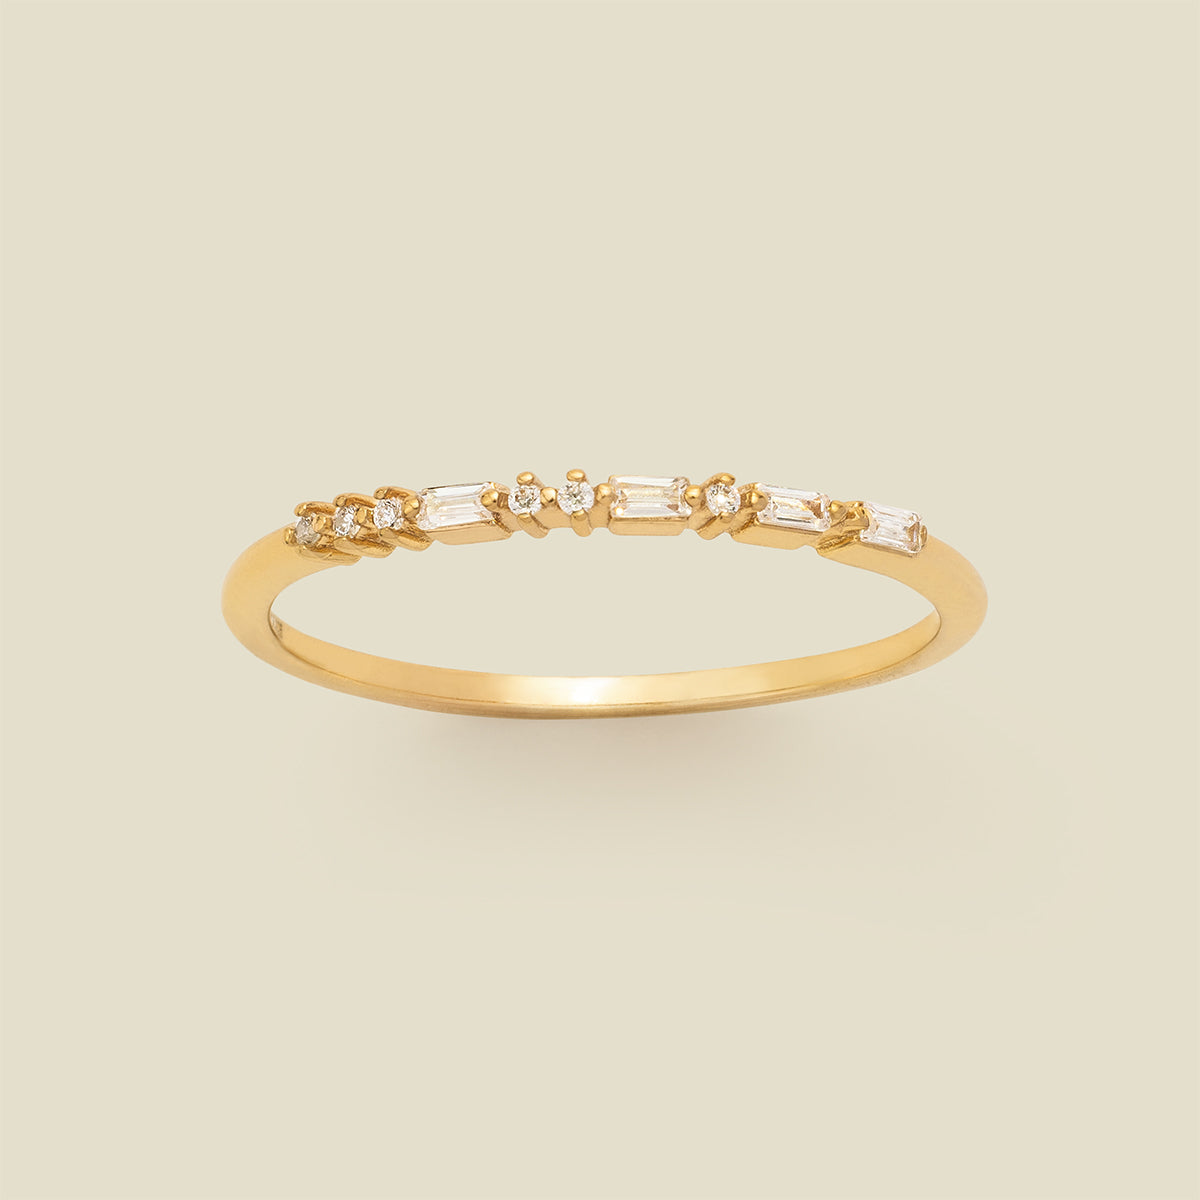 ILY Morse Code Ring Gold Vermeil / 5 Ring